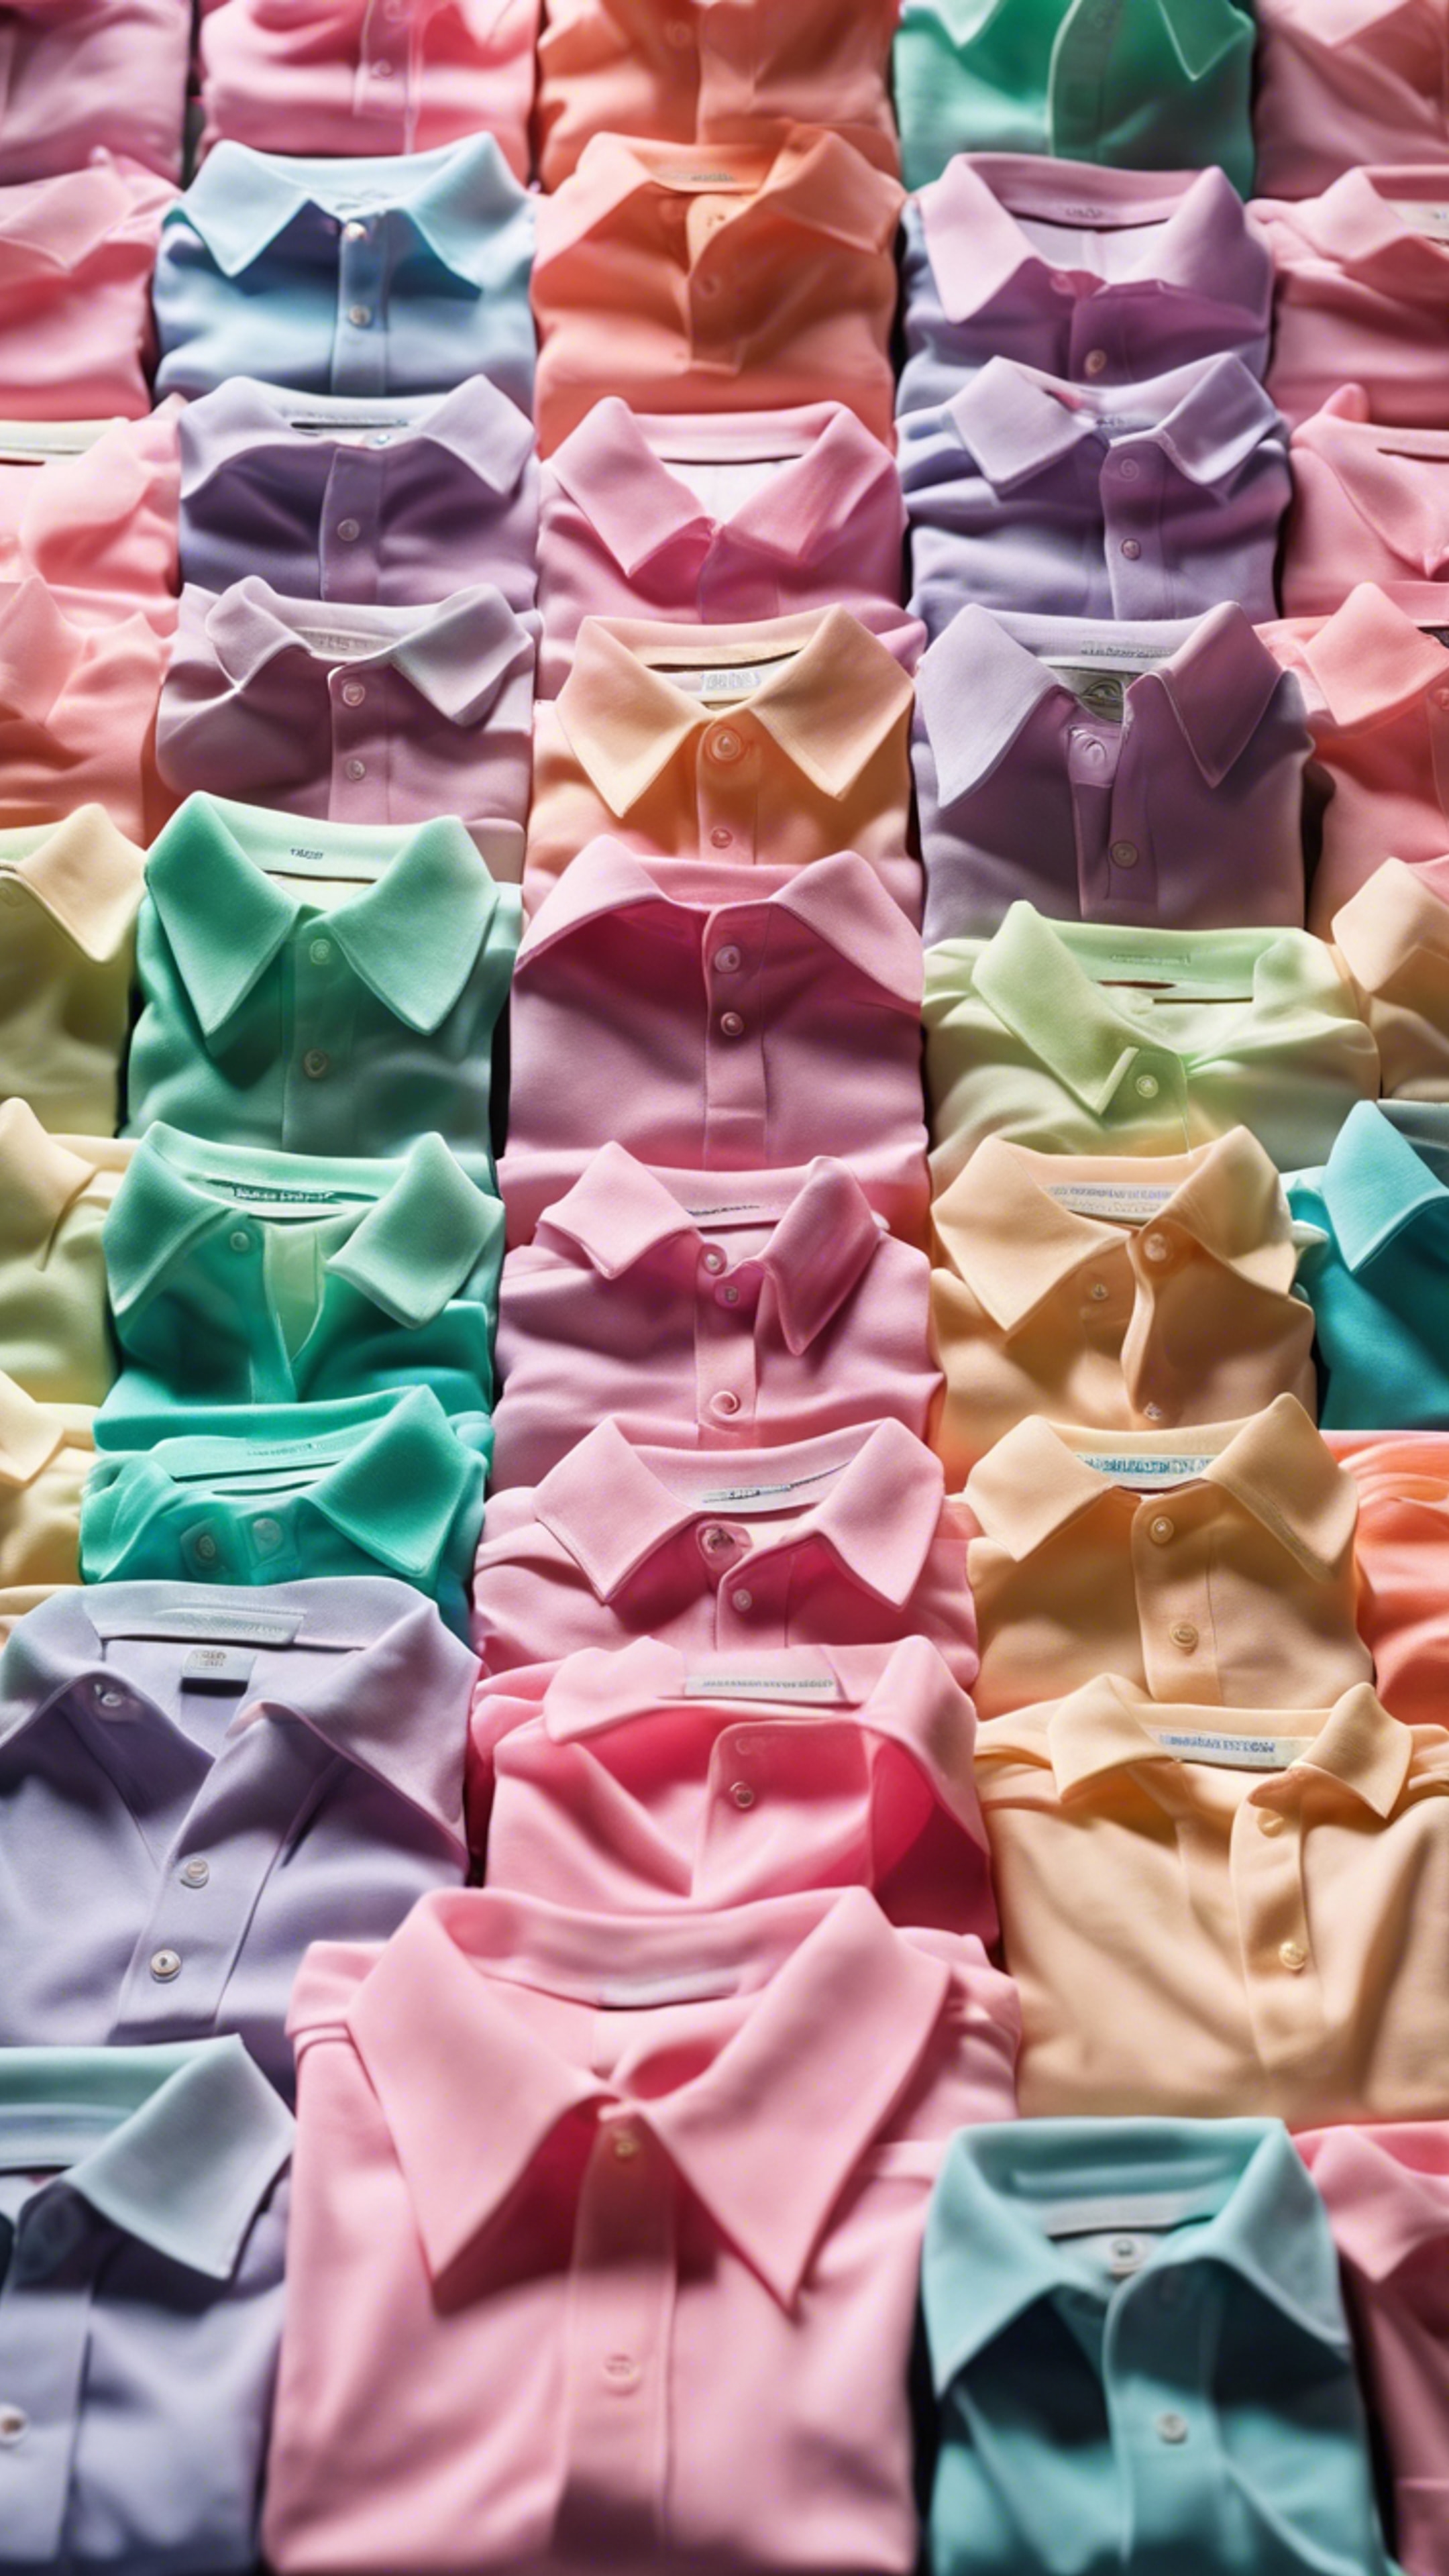 An array of neon pastel polos neatly arranged in a preppy boutique. วอลล์เปเปอร์[90c24010f8ed4e2d91c1]